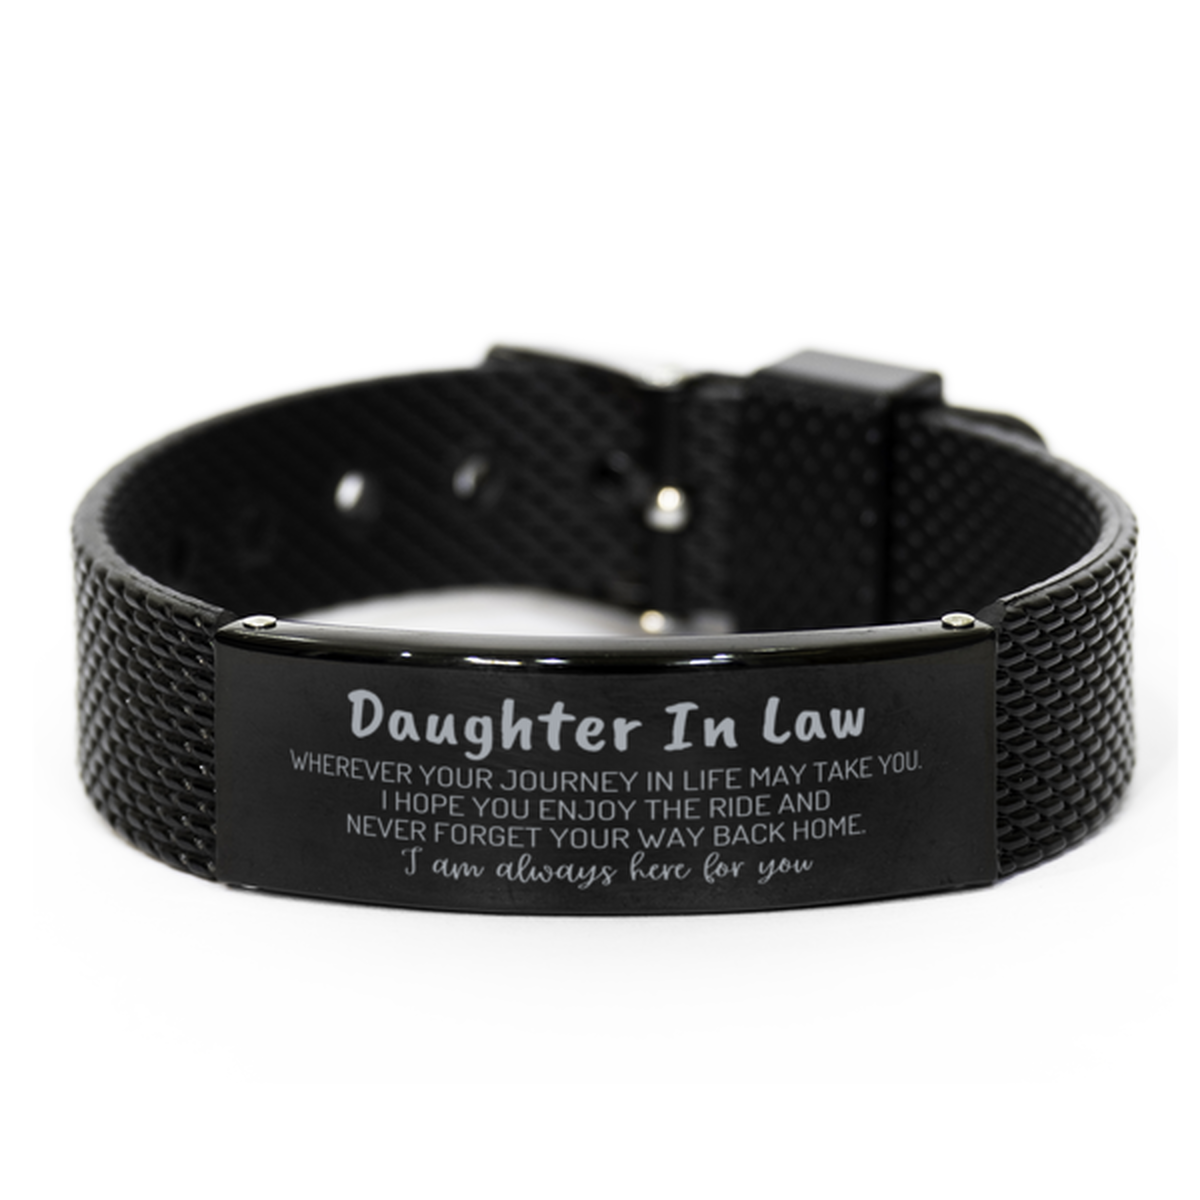 Daughter In Law wherever your journey in life may take you, I am always here for you Daughter In Law Black Shark Mesh Bracelet, Awesome Christmas Gifts For Daughter In Law, Daughter In Law Birthday Gifts for Men Women Family Loved One